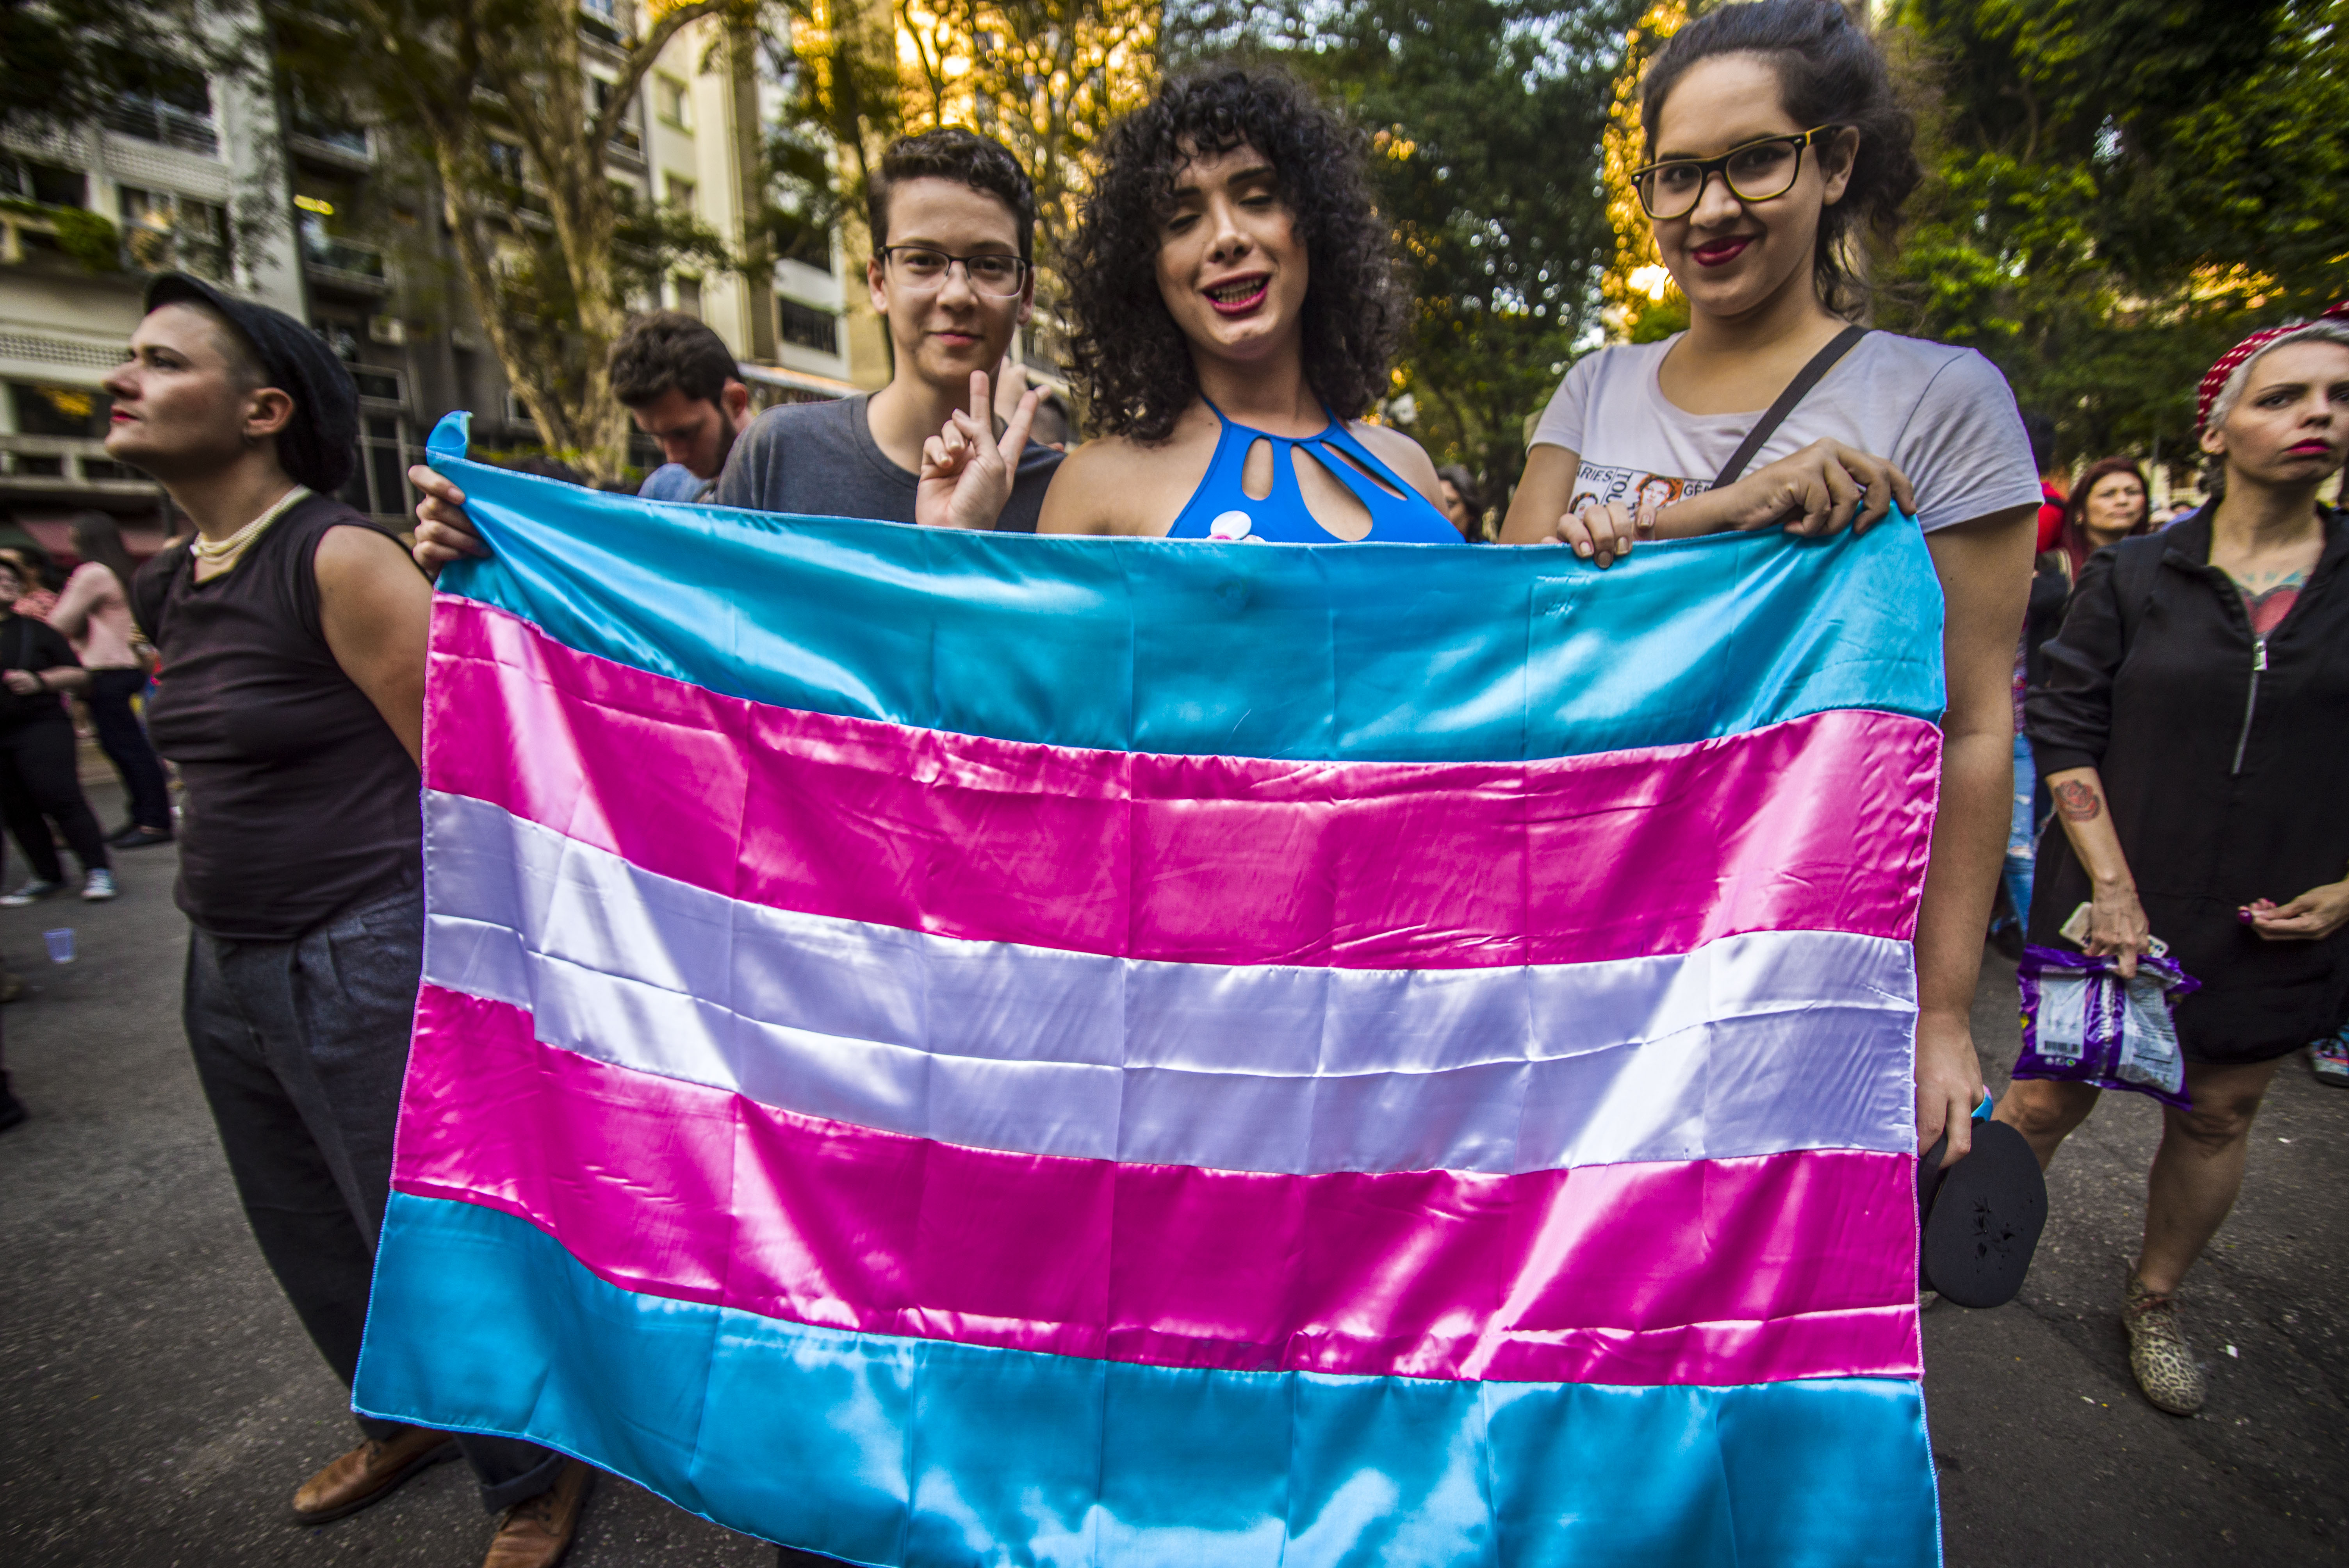 March Against Homophobia In Sao Paulo